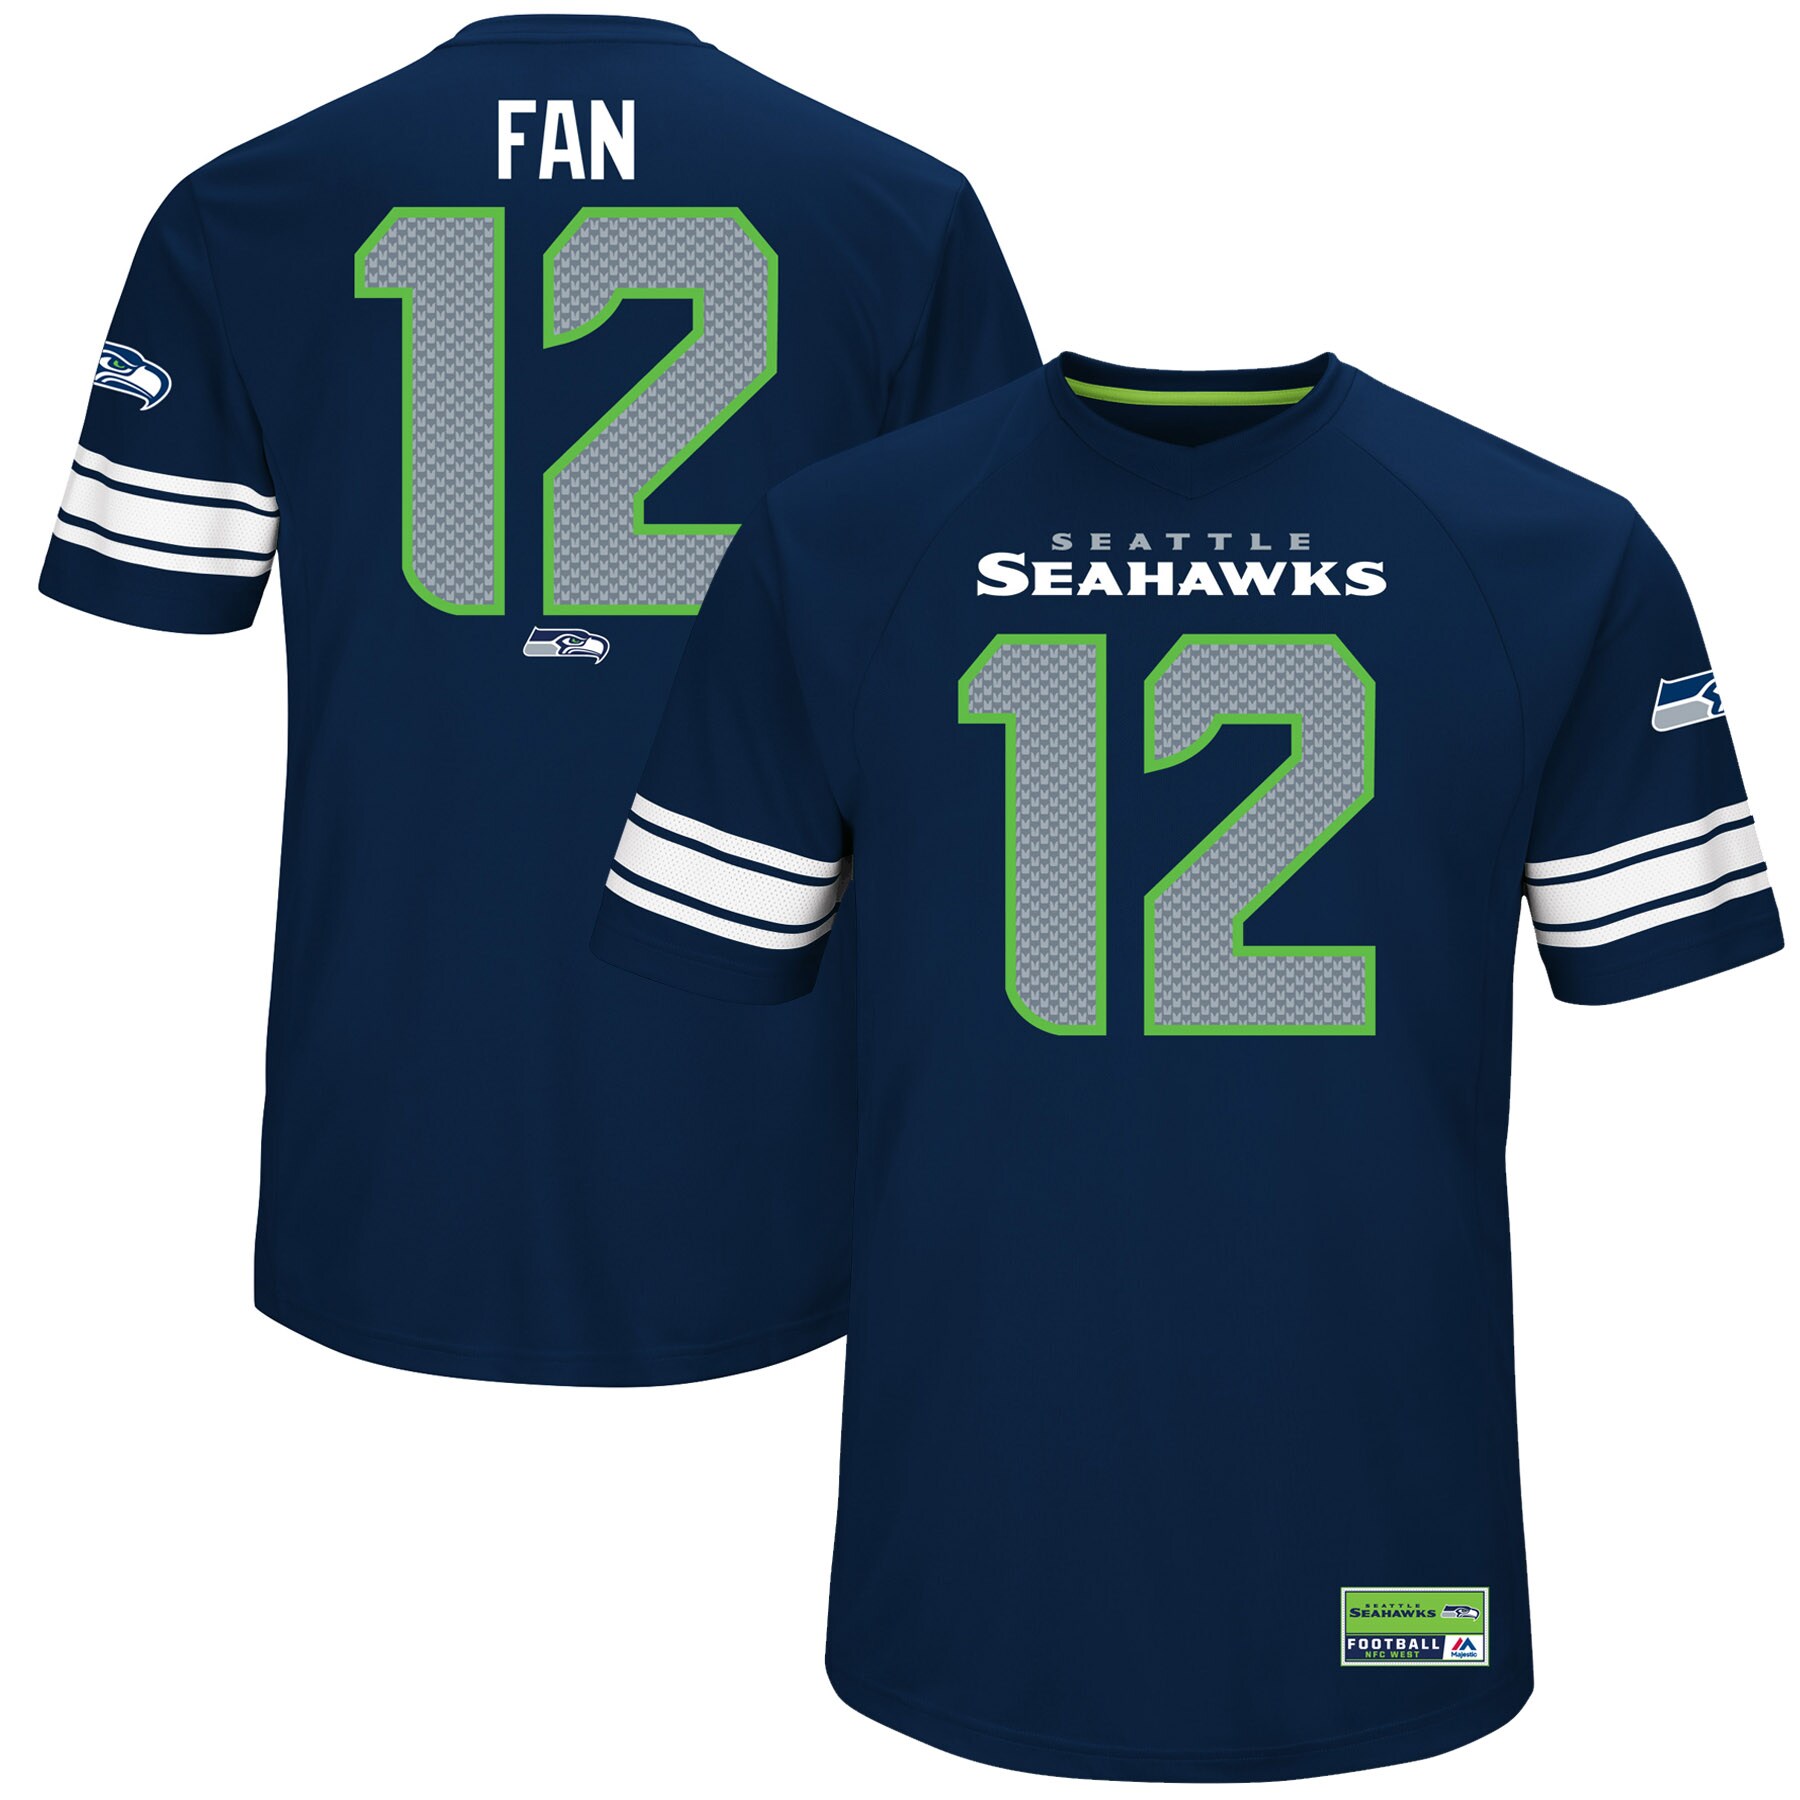 Buy 12s Seattle Seahawks Majestic Hashmark Player Name & Number T-Shirt -  College Navy F2640972 Online